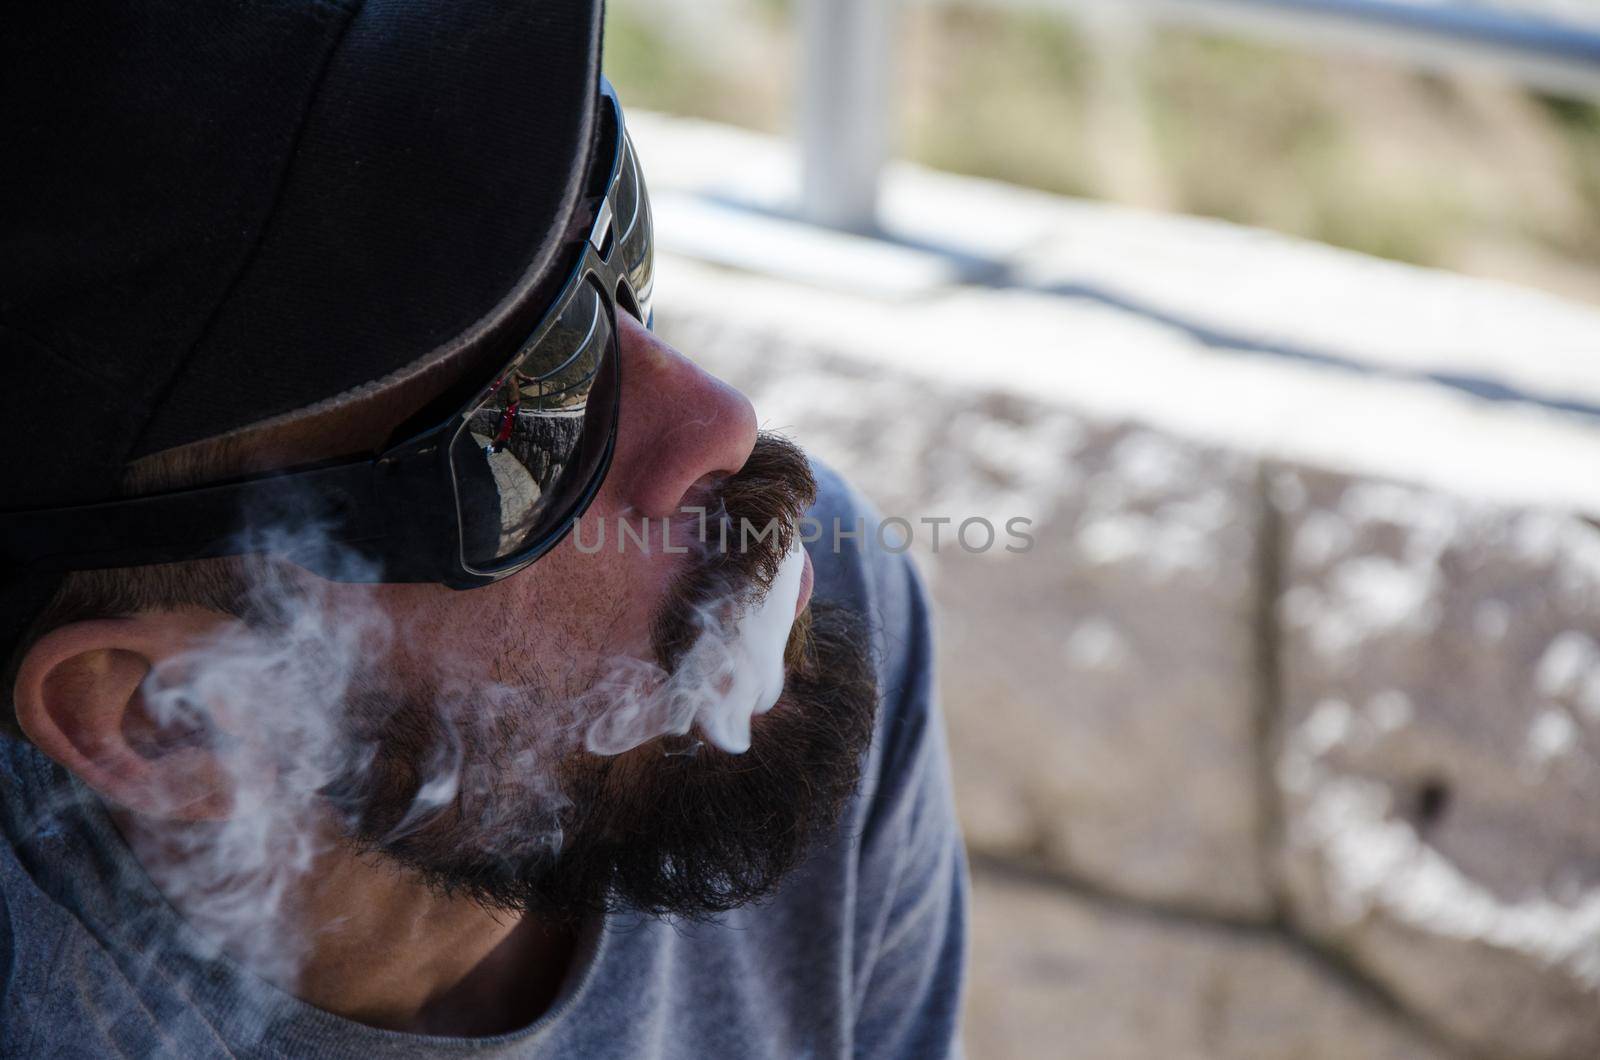 Man with sunglasses blew smoke from his mouth, low key technique